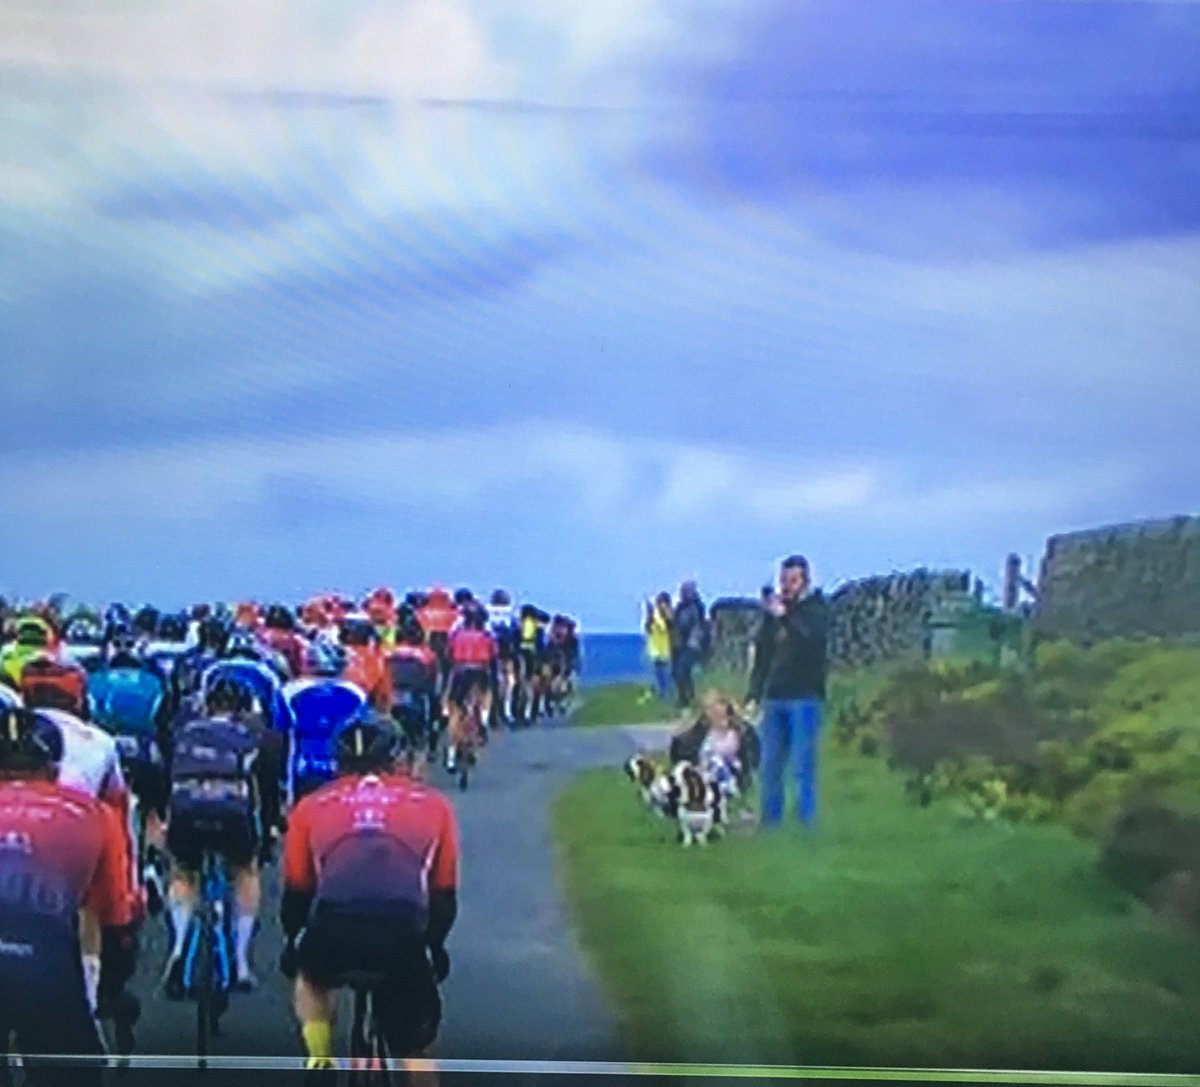 Our moment of fame yesterday when we were on ITV 4’s coverage of the Tour de Yorkshire 😂 #tdy #tourdeyorkshire #tdy2019 @letouryorkshire @Welcome2Yorks